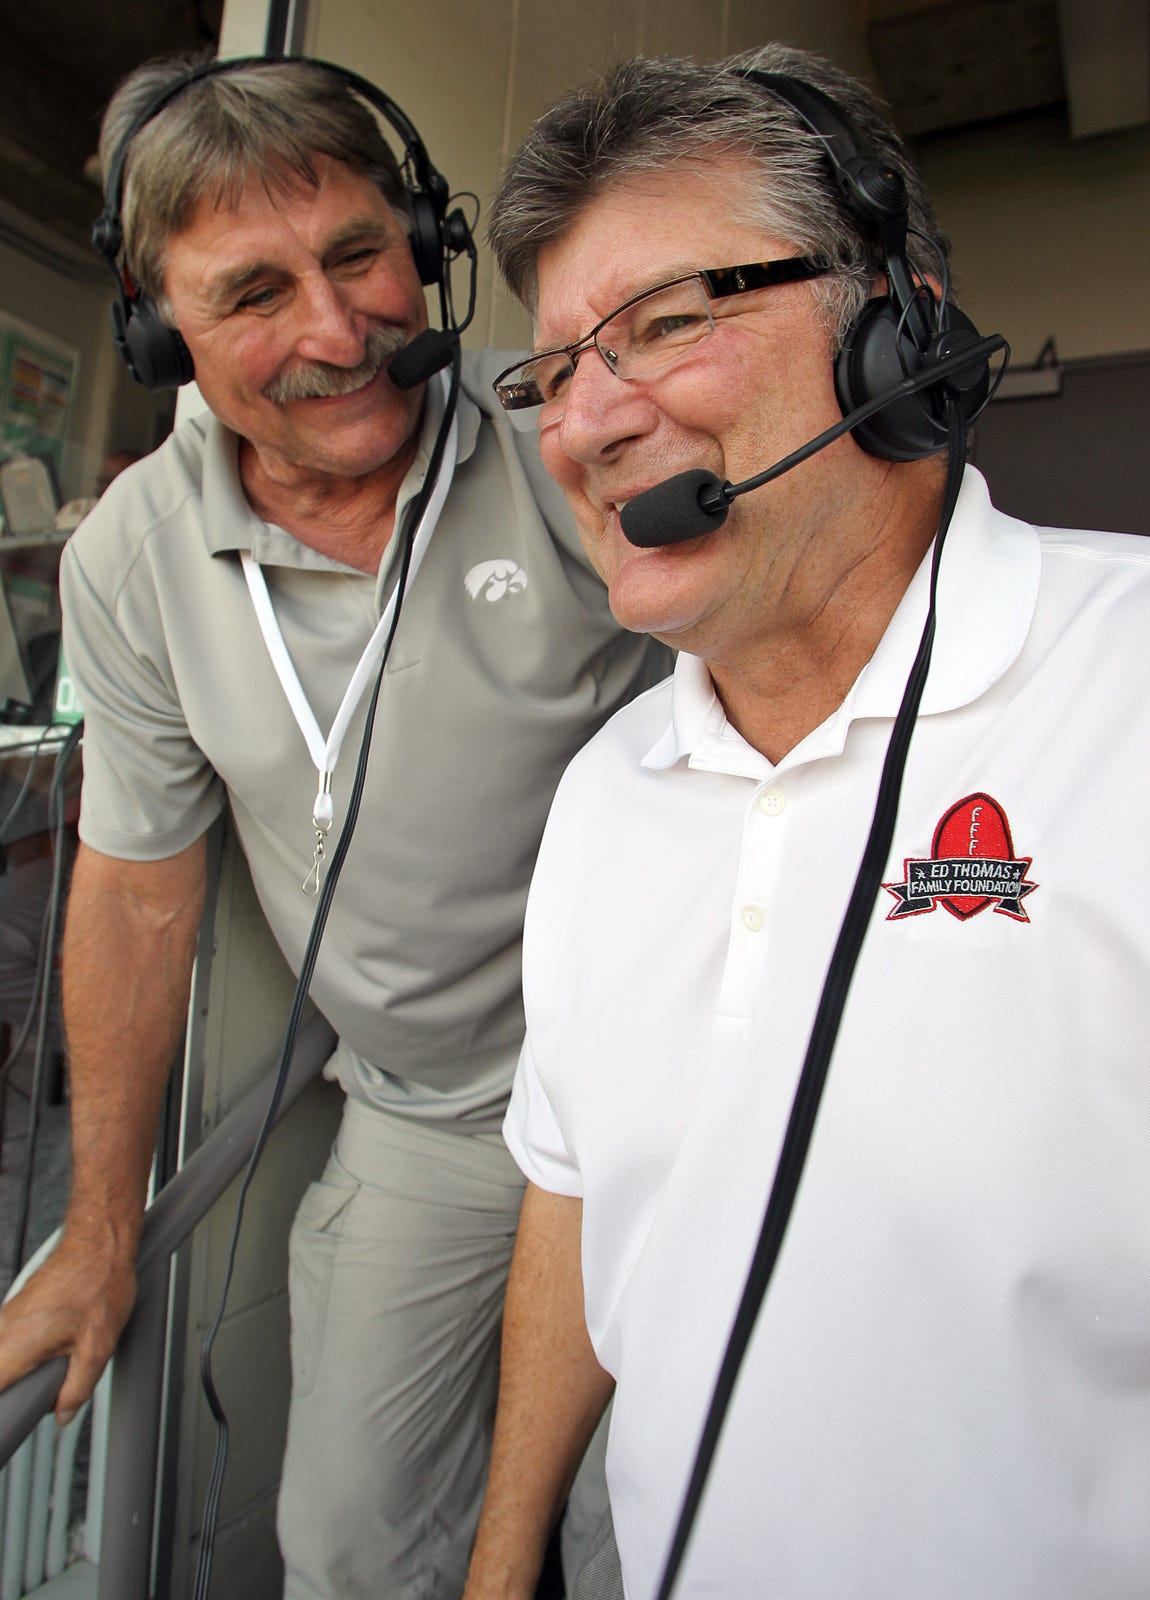 From 2013: Iowa radio analyst Ed Podolak, left, with broadcaster Gary Dolphin, right, says he’s comfortable being removed from the game without the pressure on.